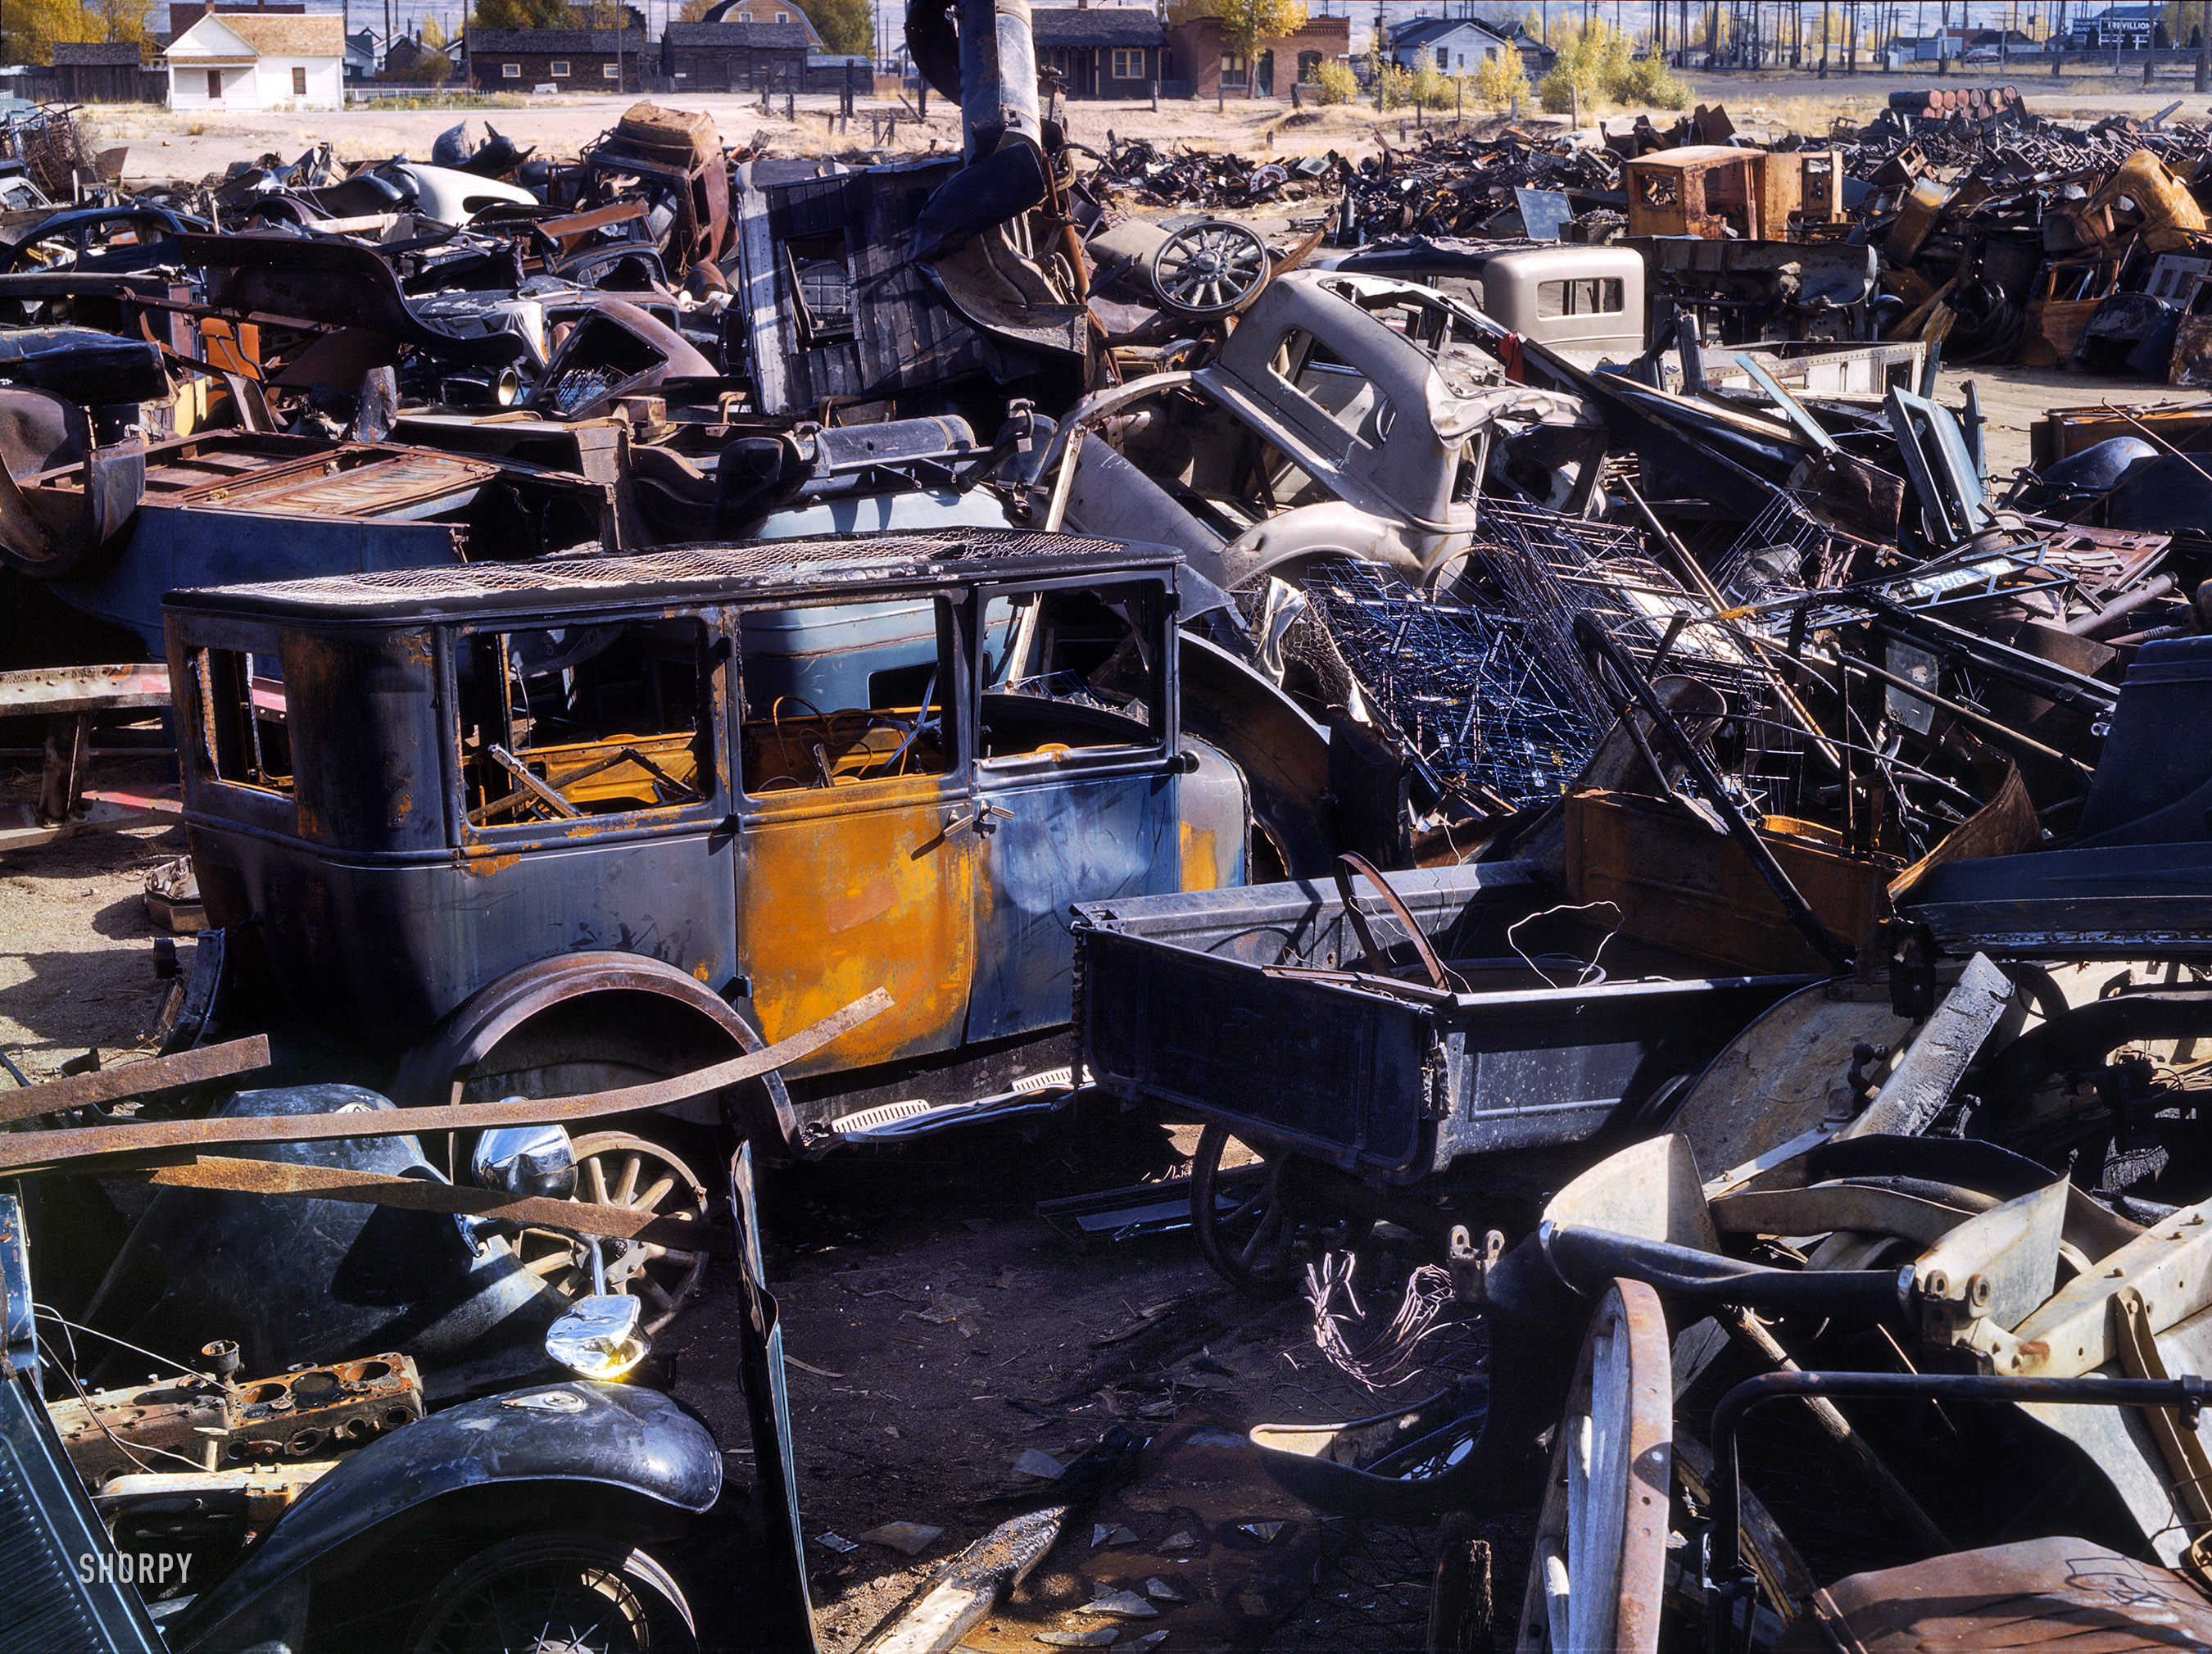 October 1942. "Scrap and salvage depot in Butte, Montana." 4x5 Kodachrome transparency by Russell Lee for the Office of War Information. View full size.